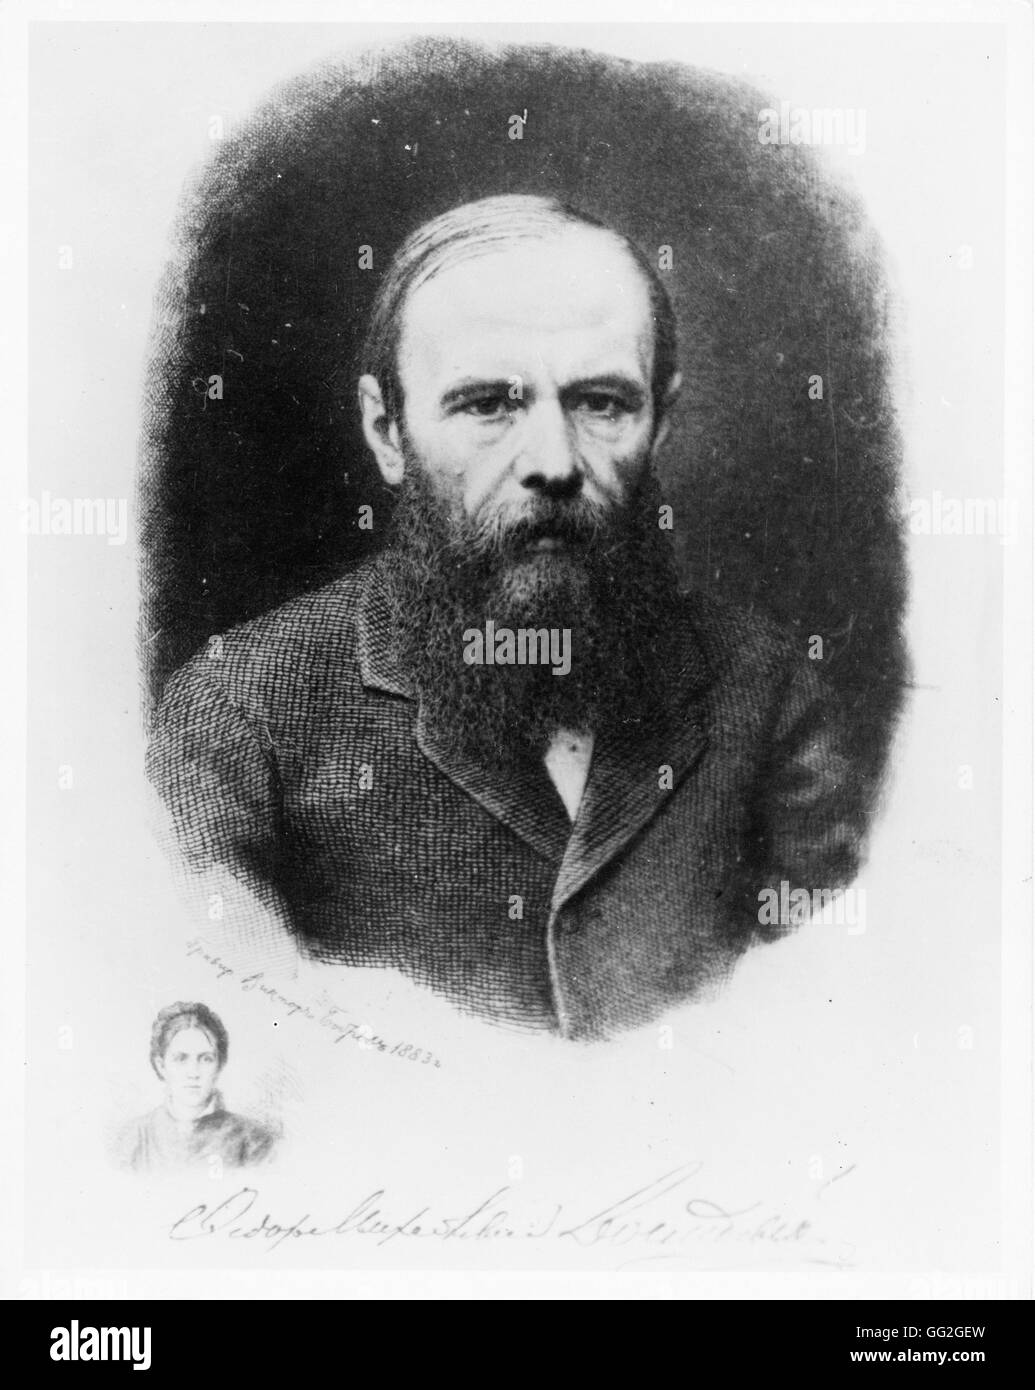 Portraits of Fyodor and Anna Dostoyevsky Engravings after photographs Stock Photo